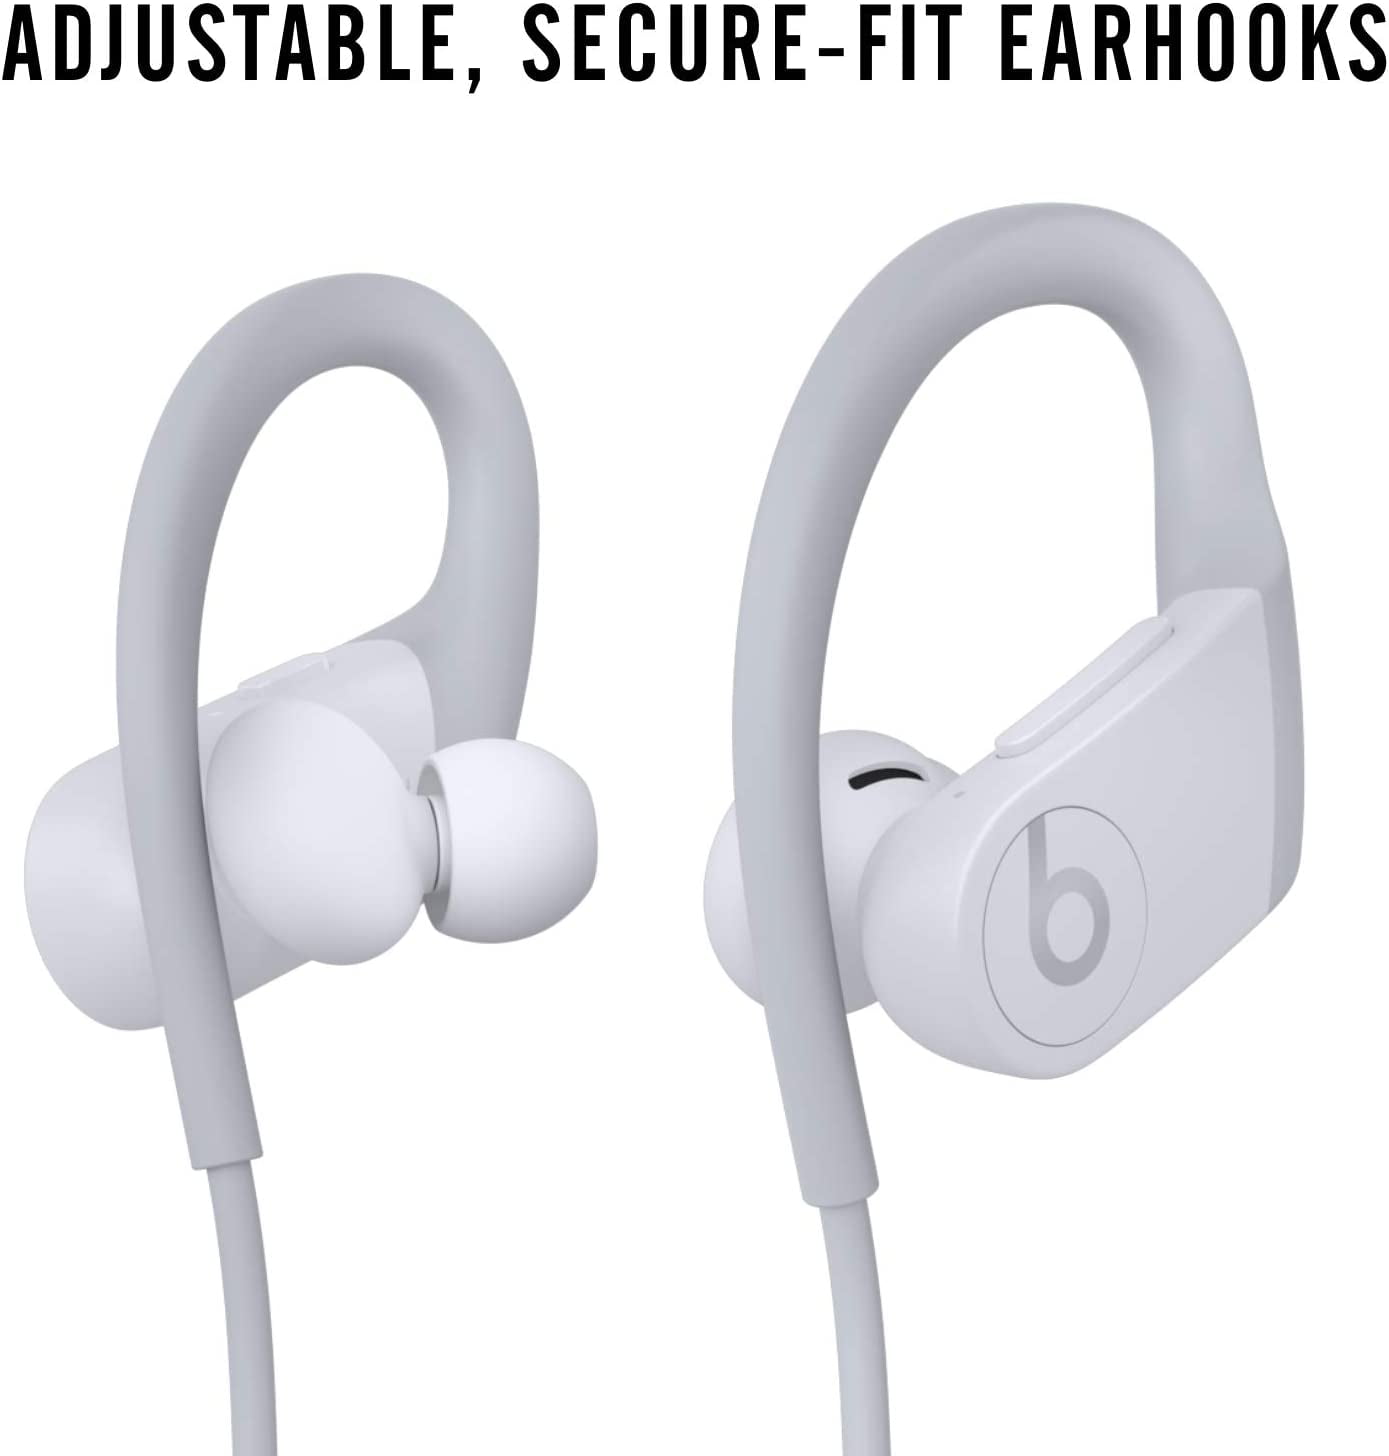 Sweat Resistant Earbuds 15 Hours of Listening Time Powerbeats High-Performance Wireless Earphones Class 1 Bluetooth Latest Model White Apple H1 Headphone Chip 